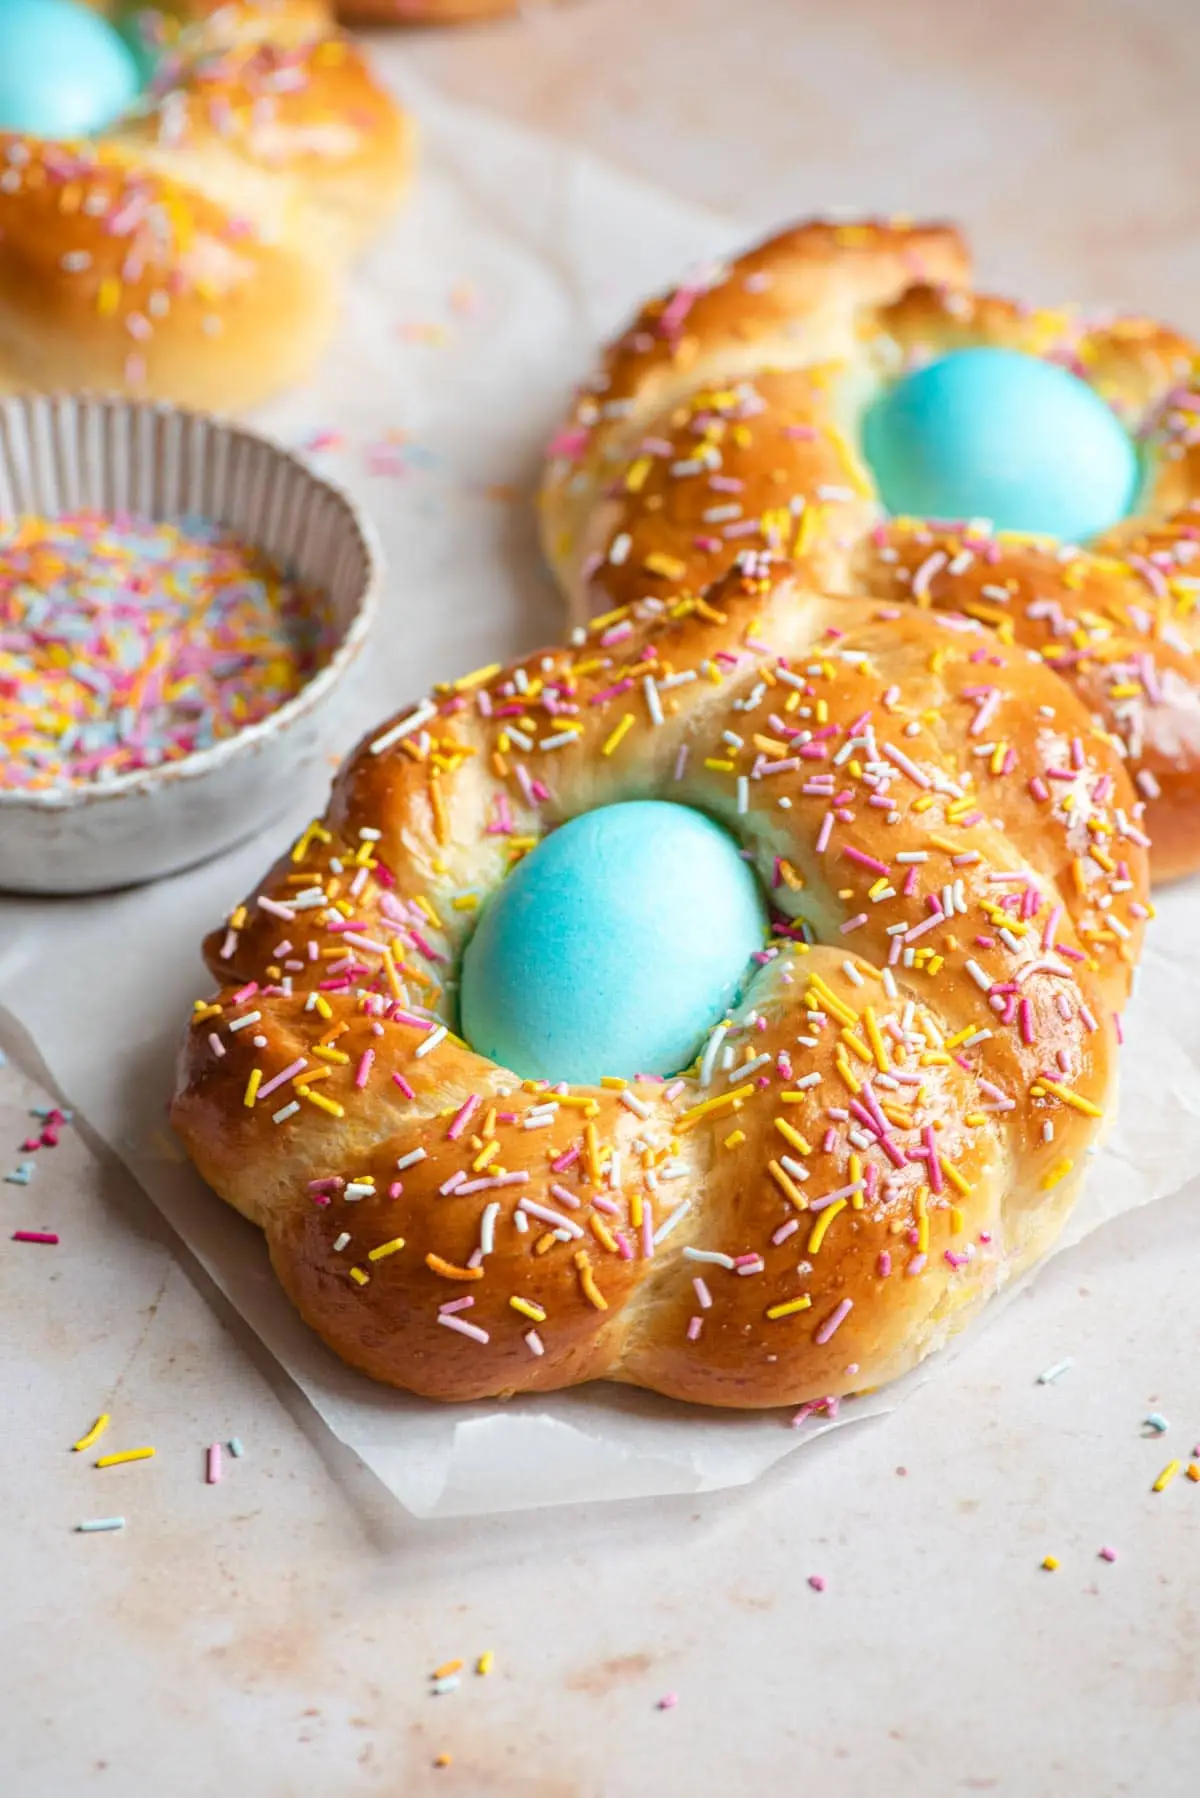 Italian Easter bread with a blue egg in the middle covered with sprinkles